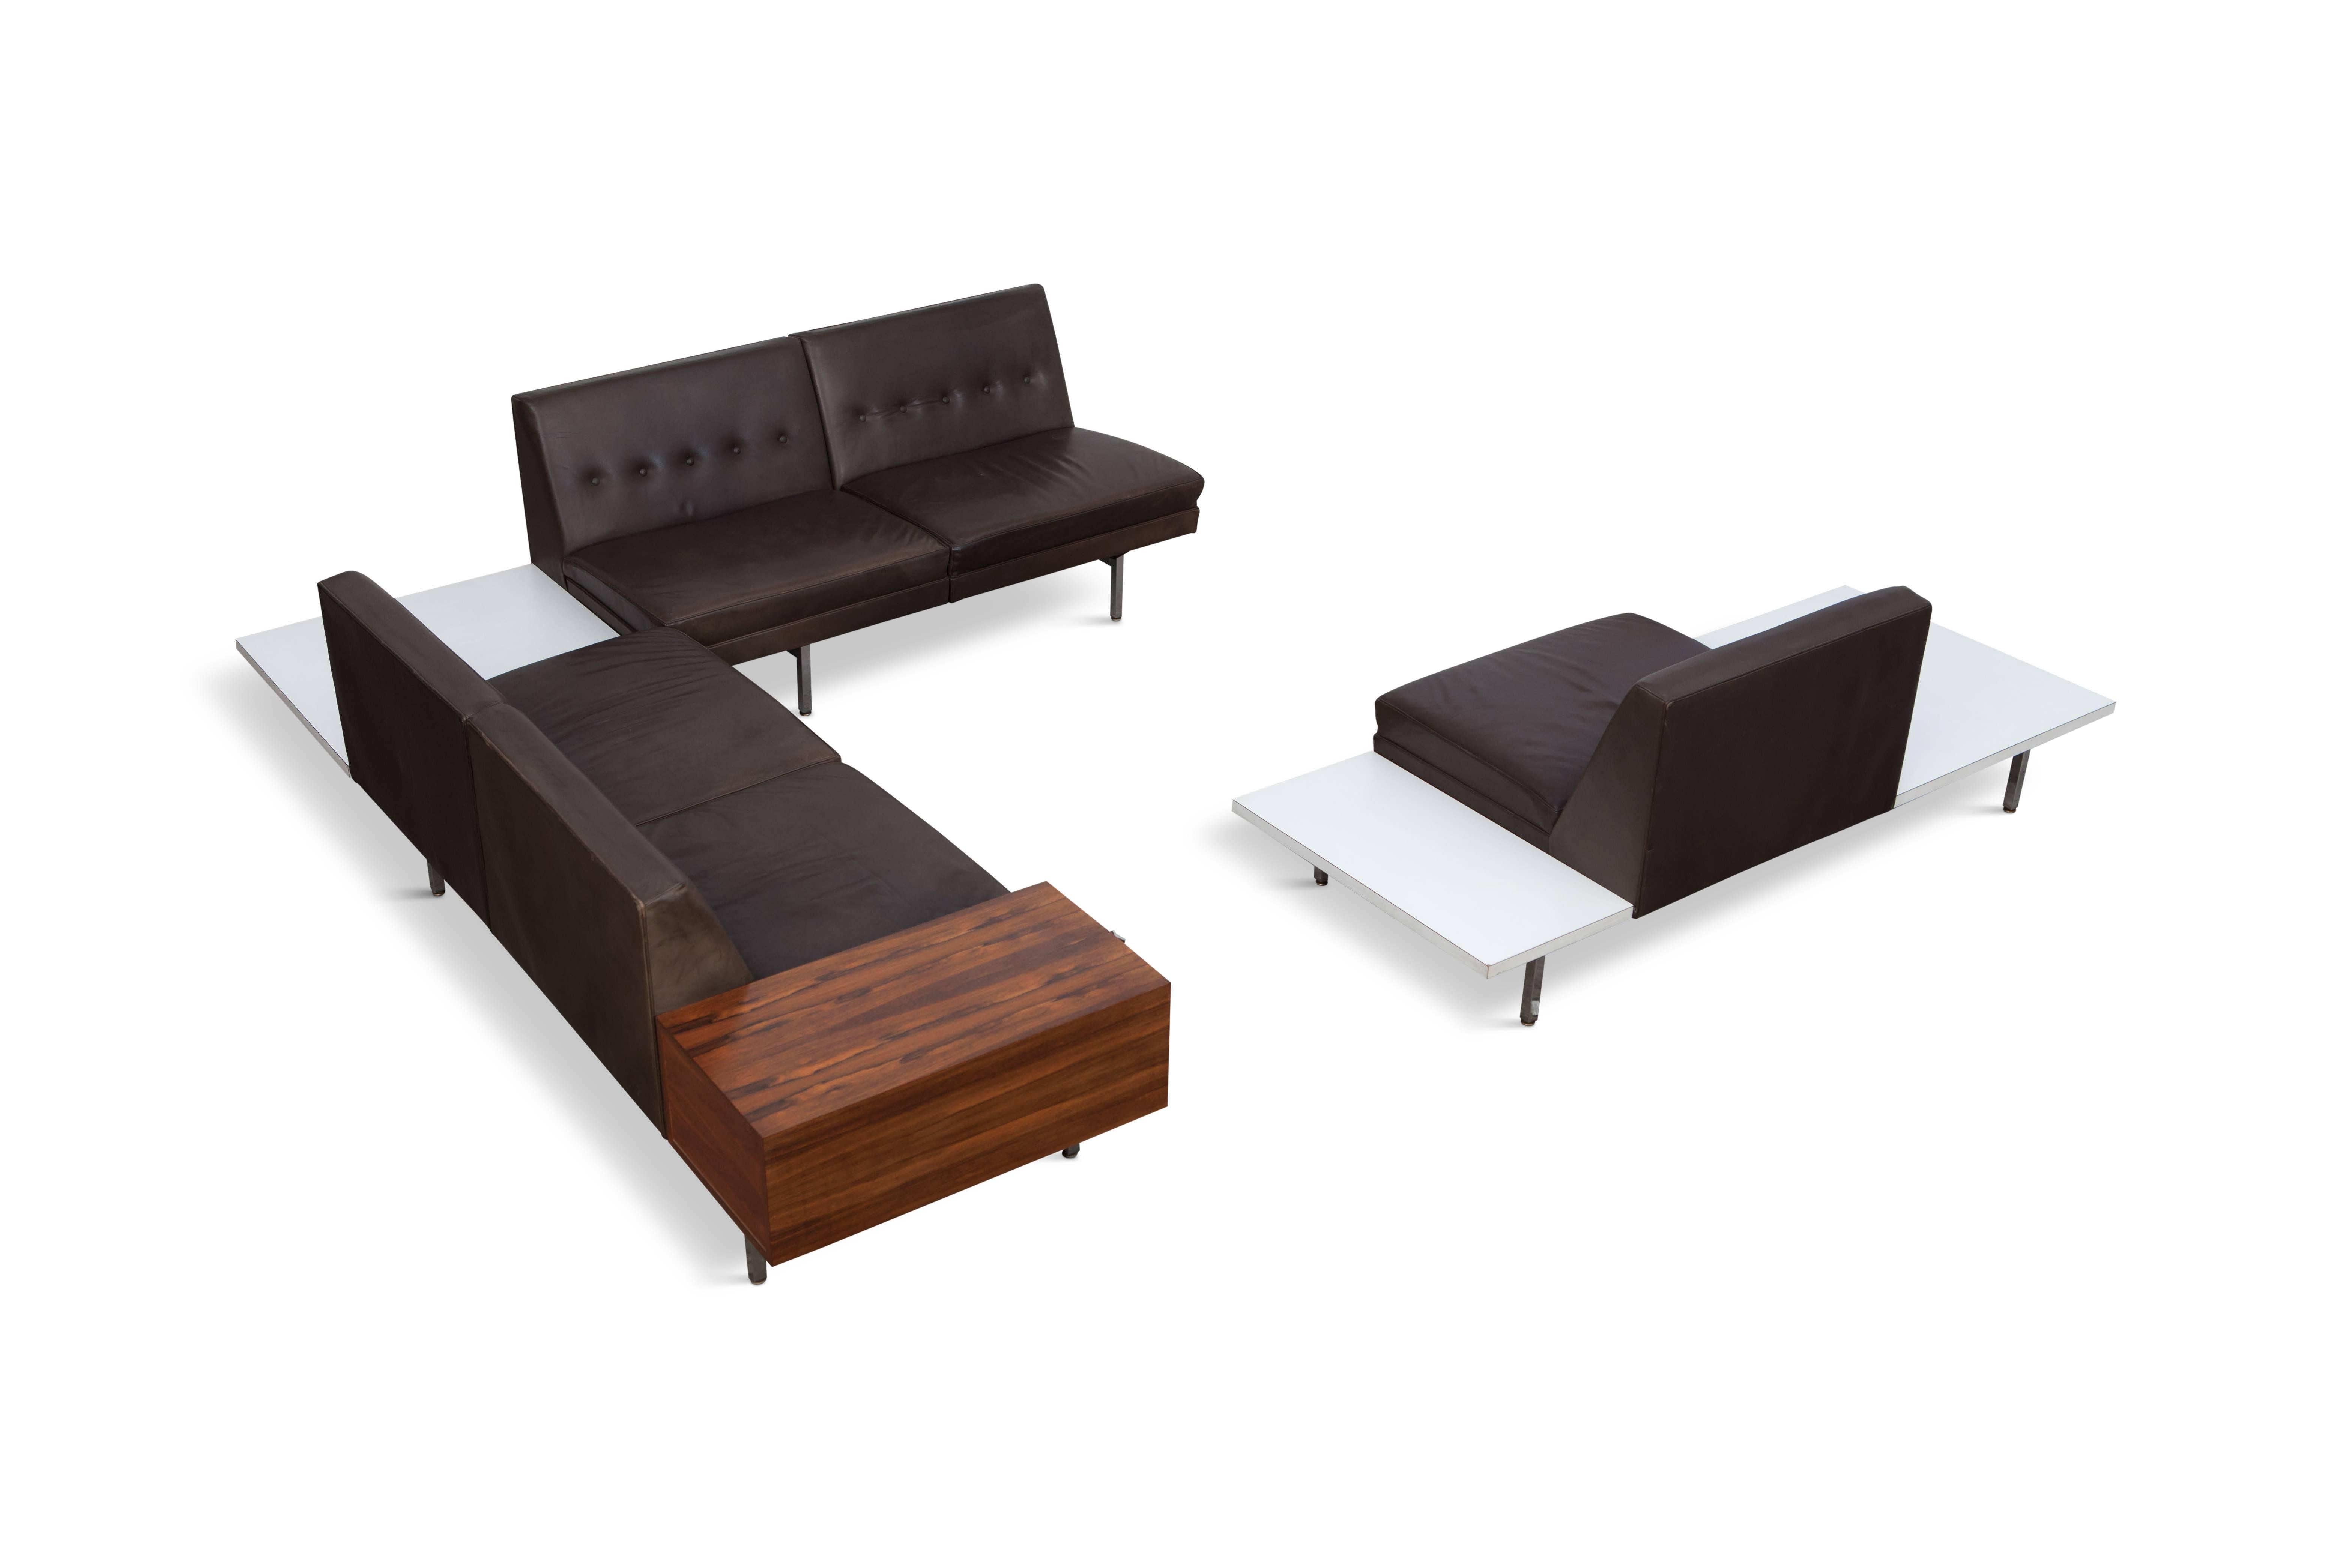 Magnificent modular system sofa designed by US George Nelson in the 1950s
for Herman Miller

Dark brown leather seating of the best possible quality is used, mounted on a typical chromed steel adjustable frame. Three white laminate tables and a